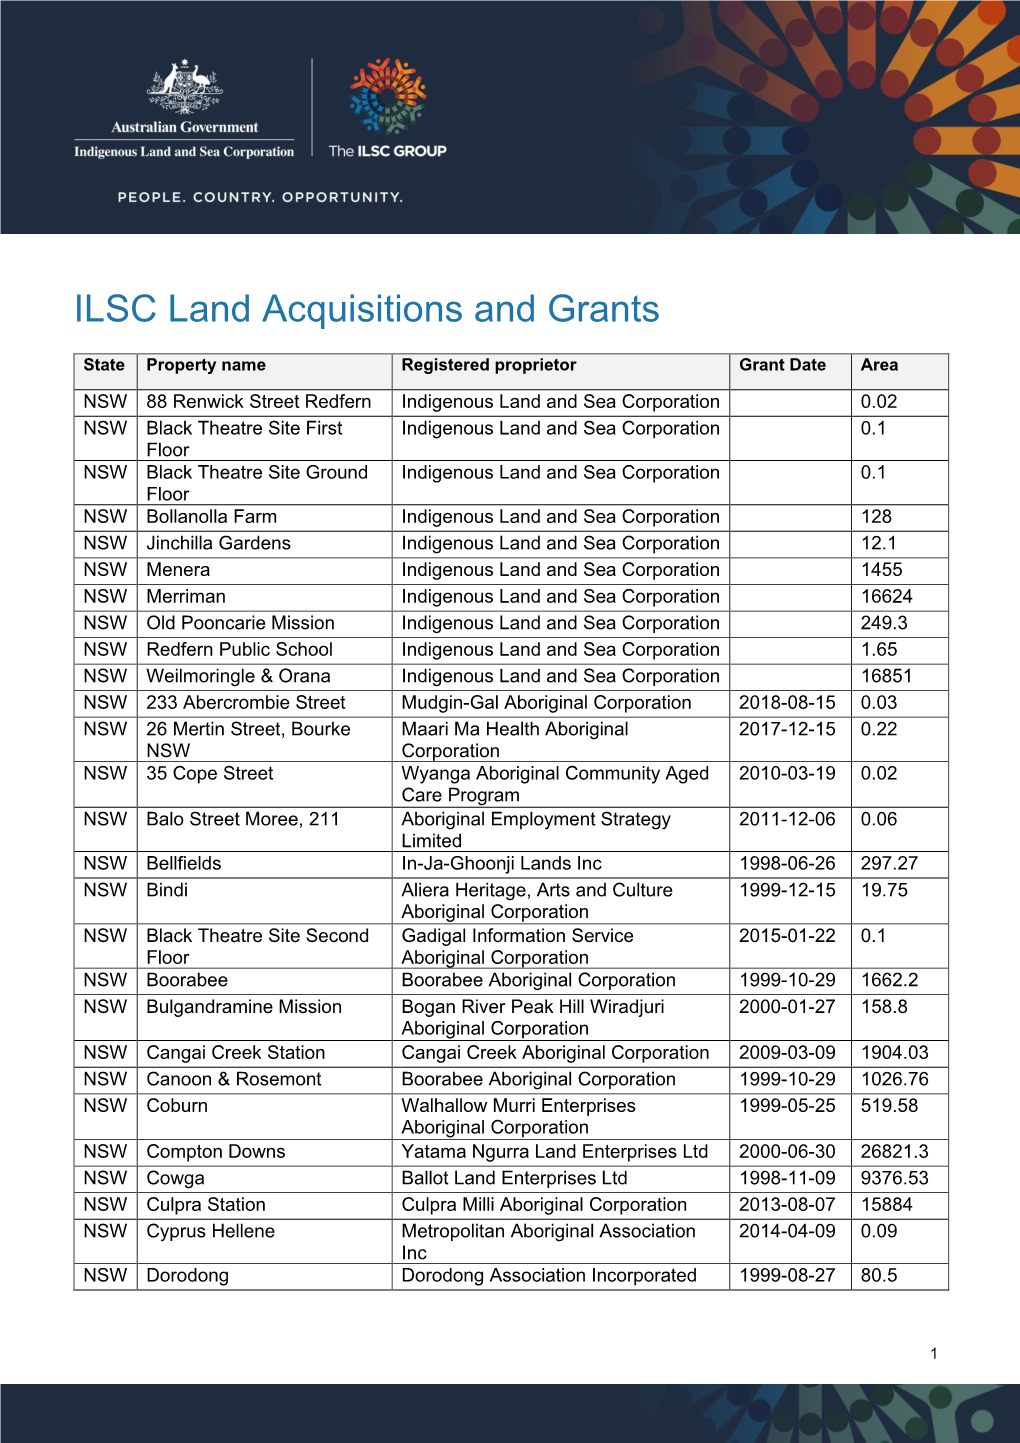 ILSC Land Acquisitions and Grants